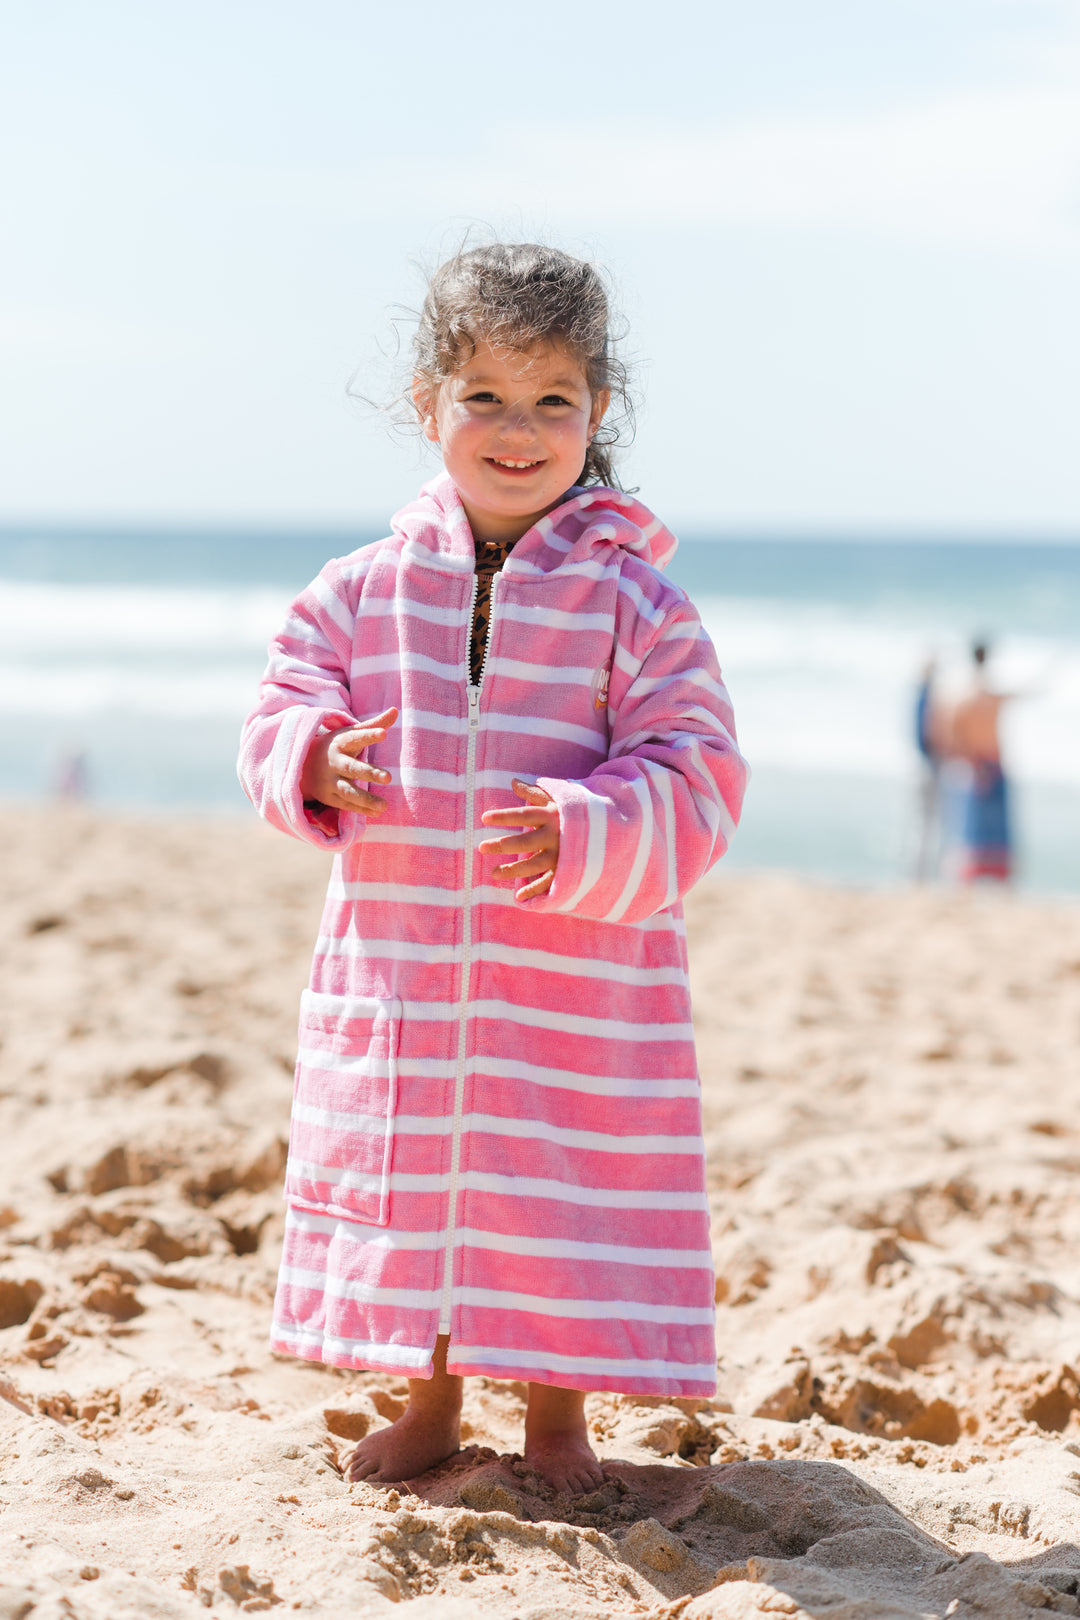 Zippy Calm Pink Kids Hooded Towels with Zipper